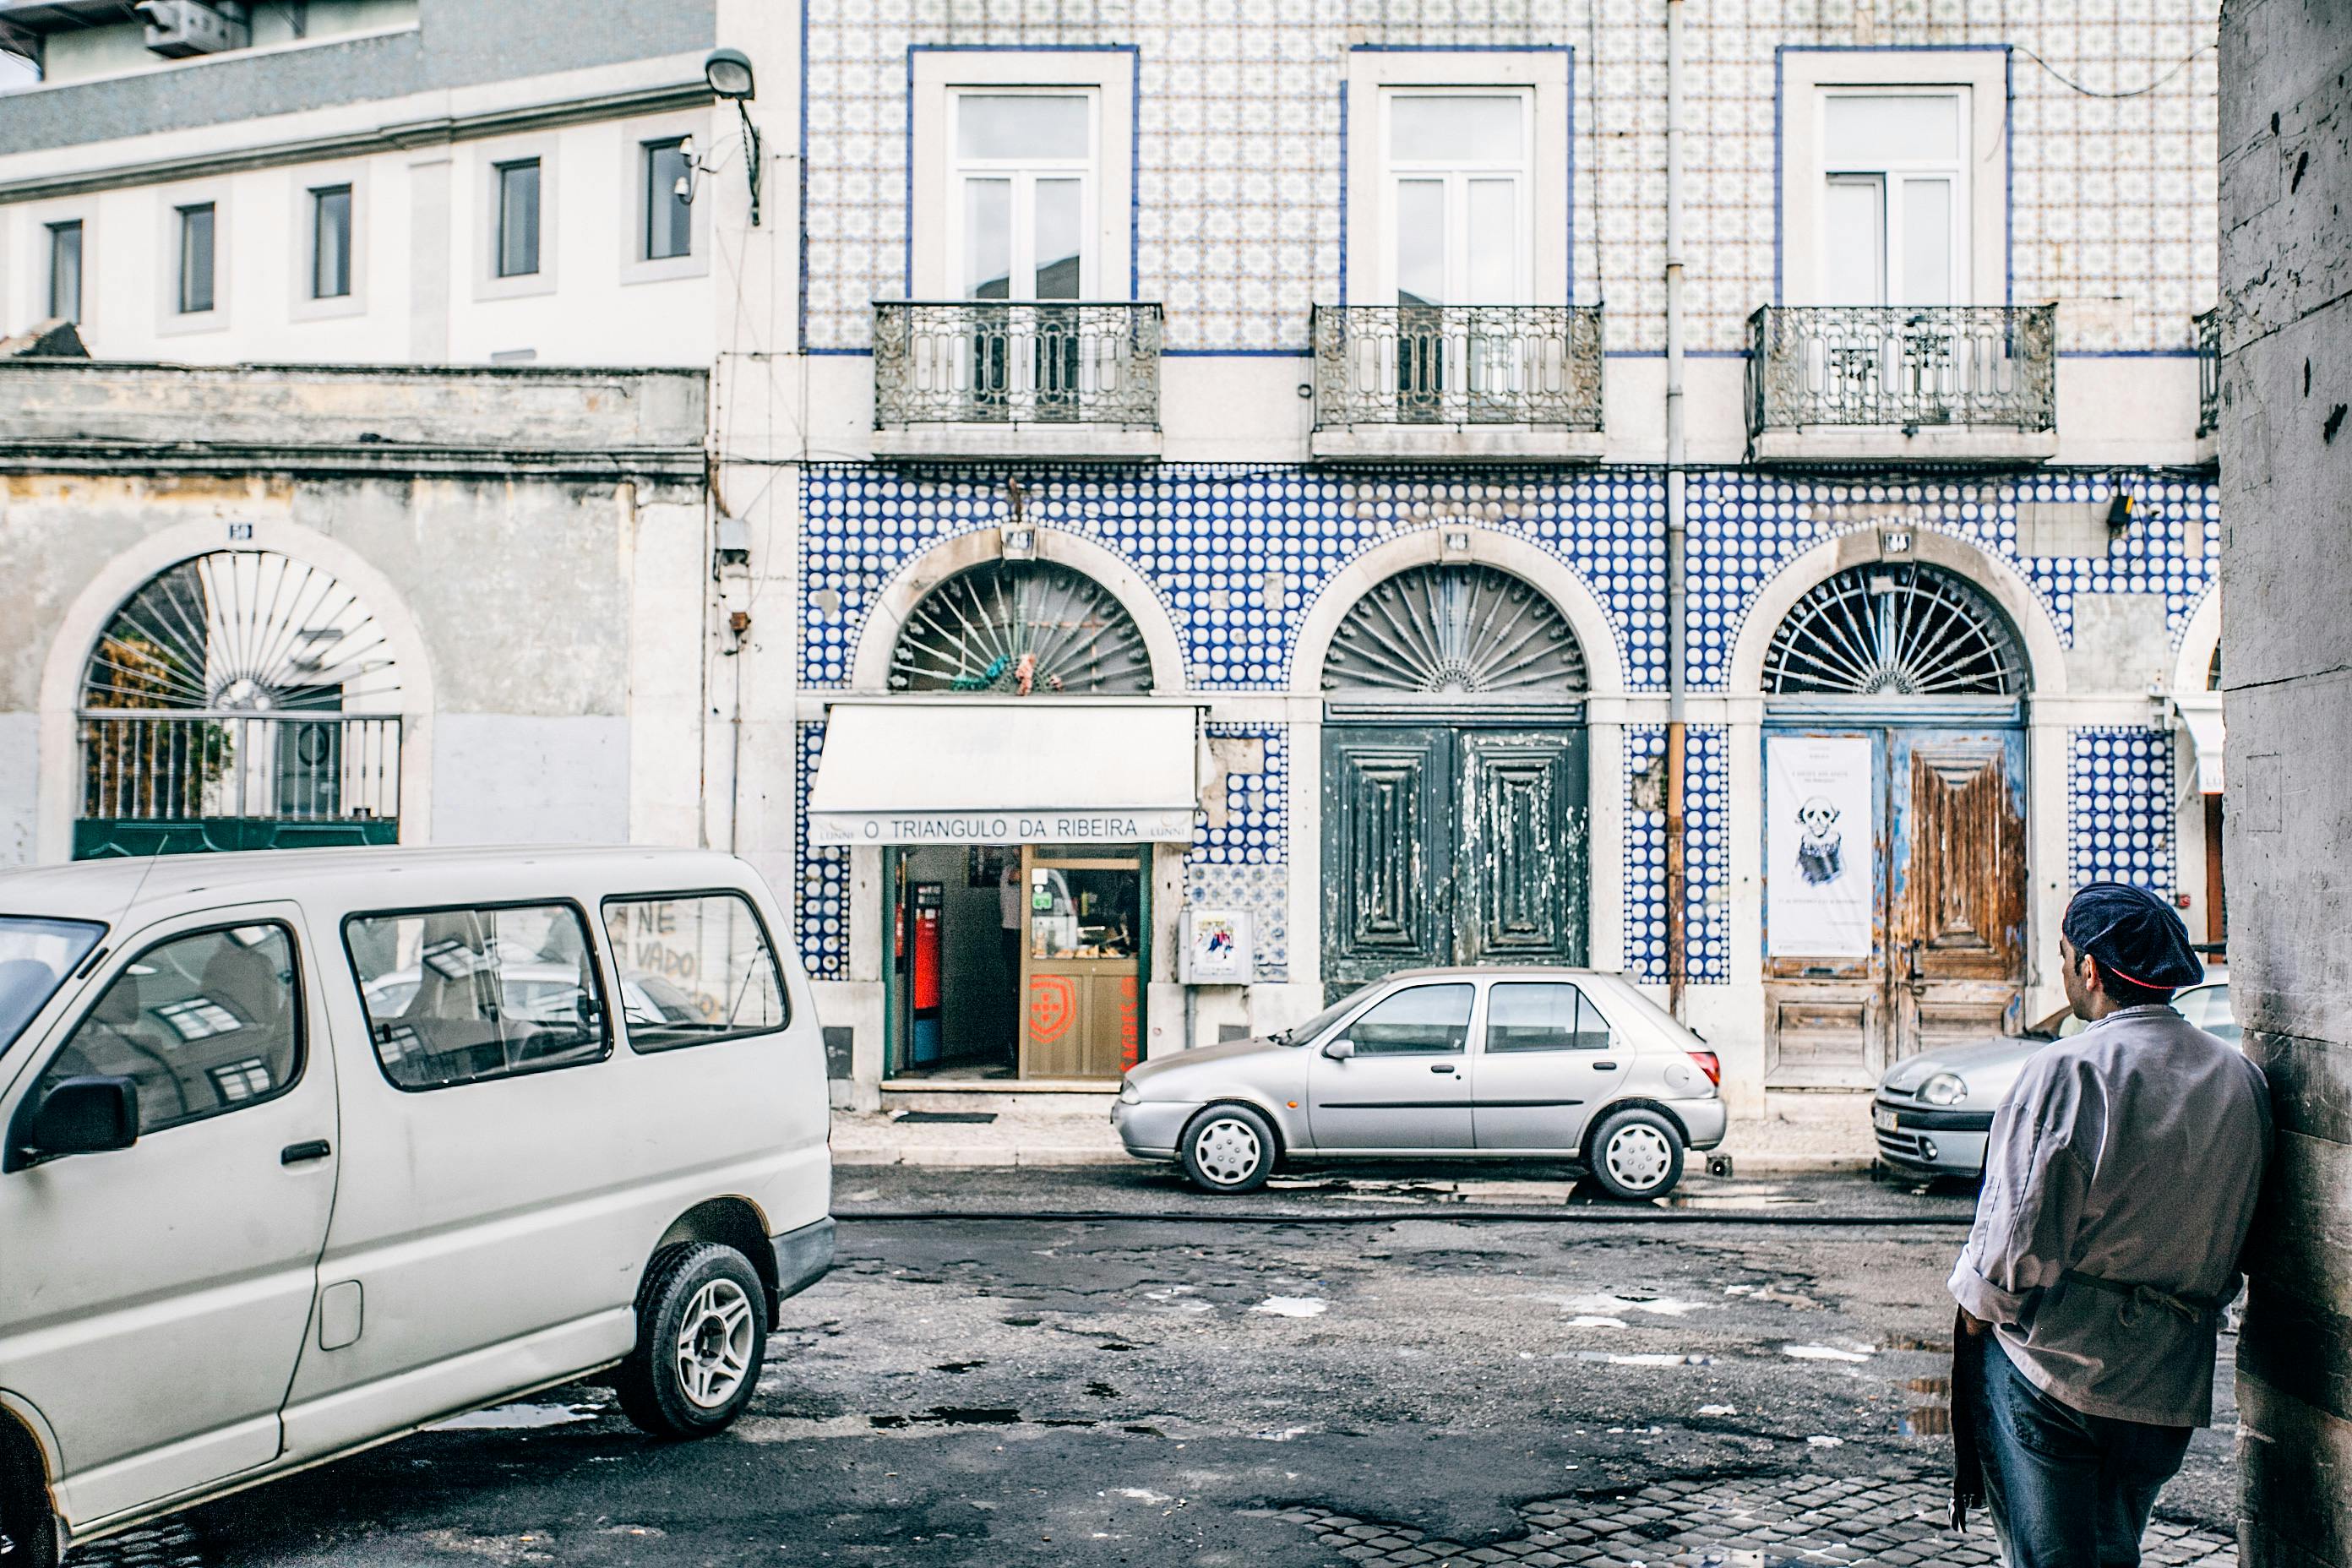 A car parked in front of a café | Source: Pexels